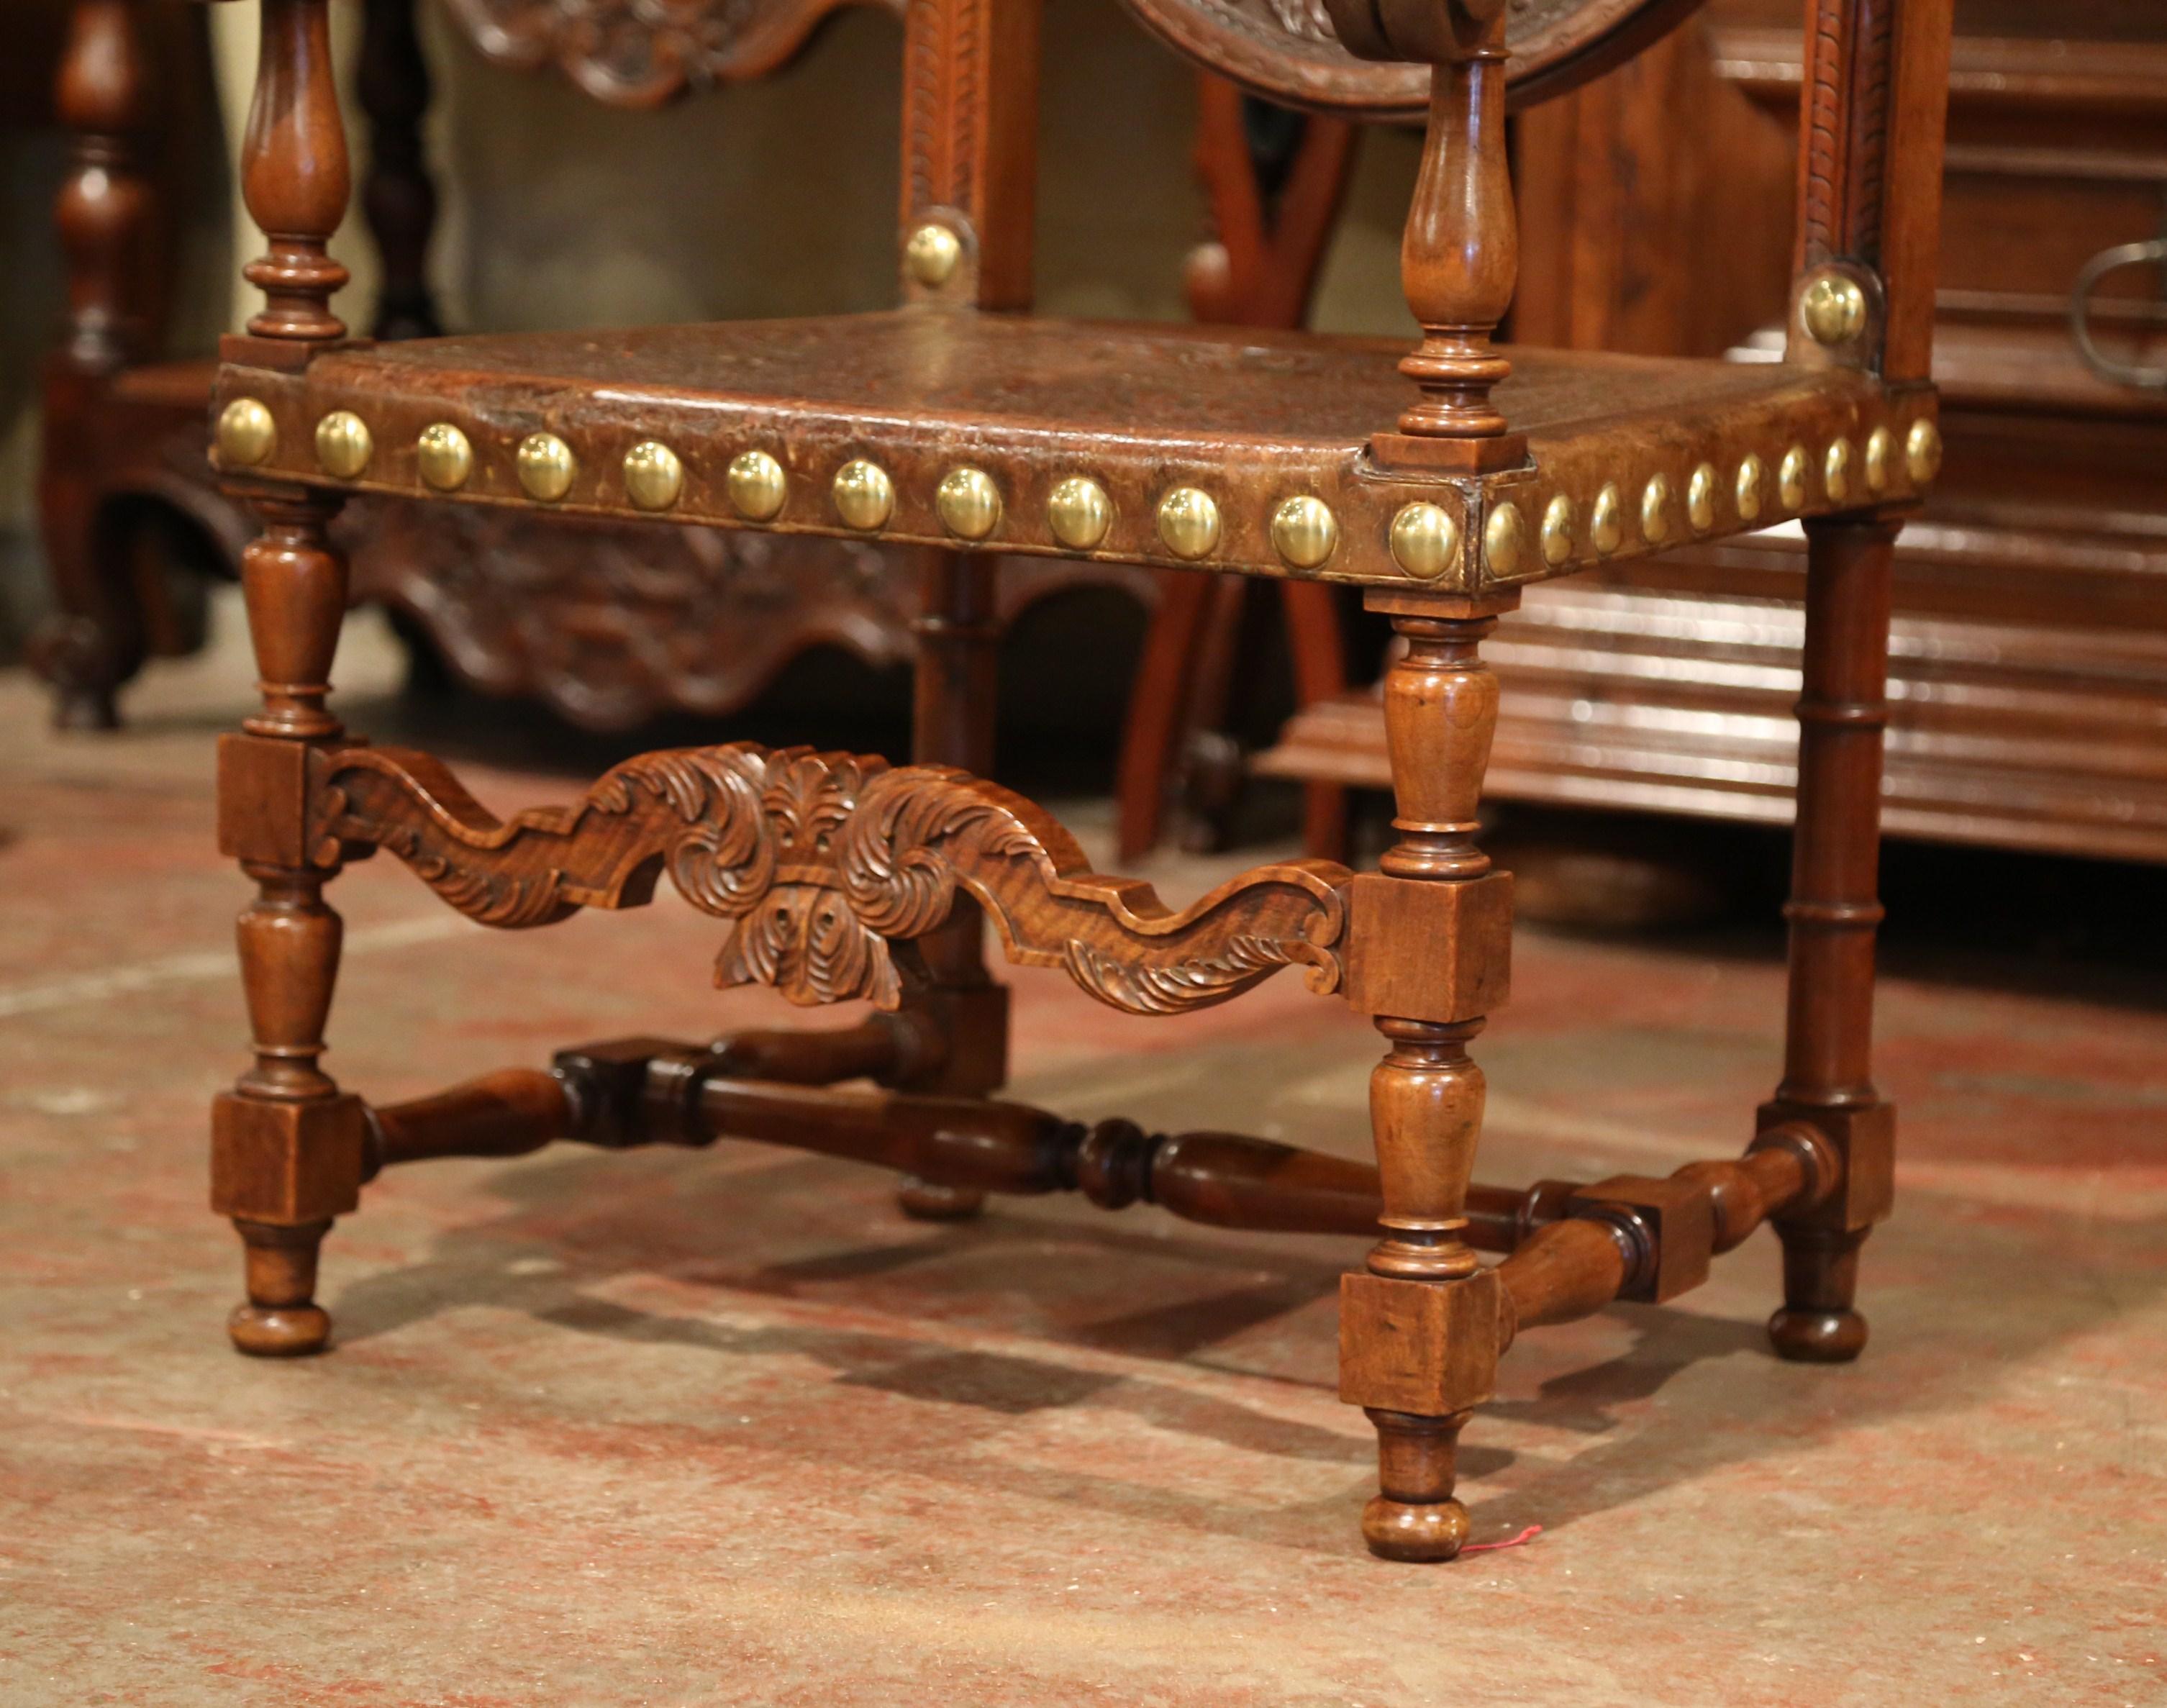 Hand-Carved 18th Century Spanish Carved Walnut Armchair with Embossed Leather and Finials